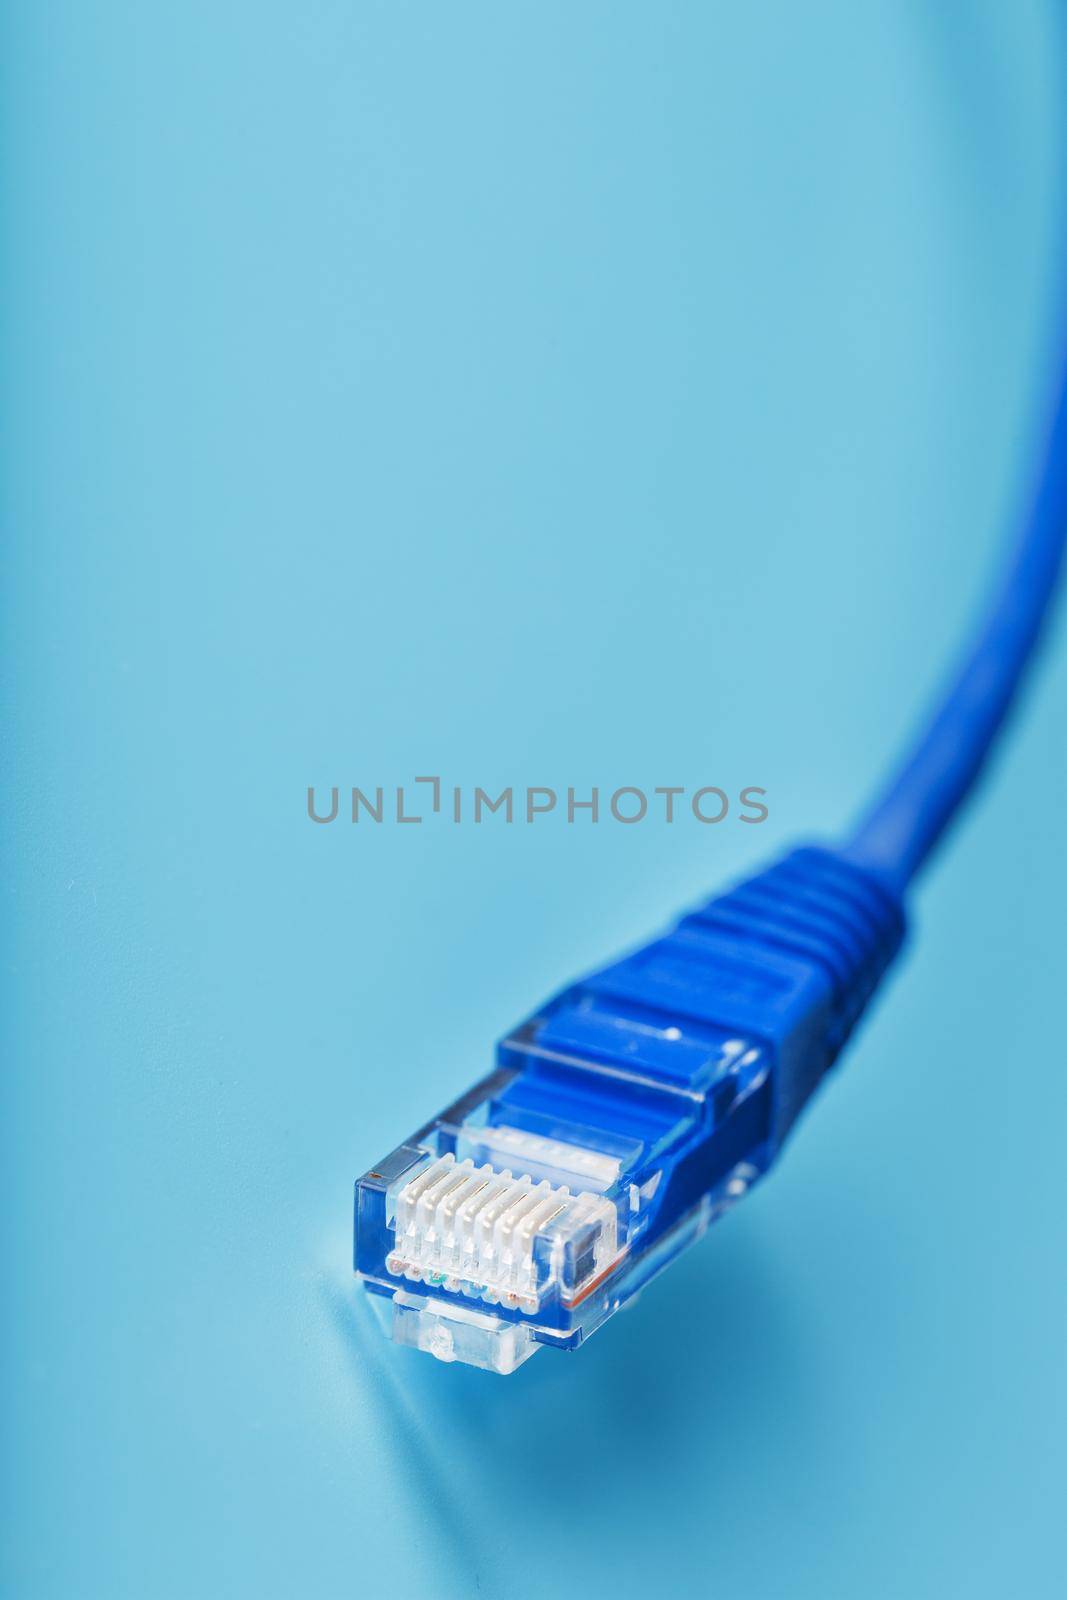 A coil of an Internet network cable for data transmission on a blue background. Patch cord for LAN cable.